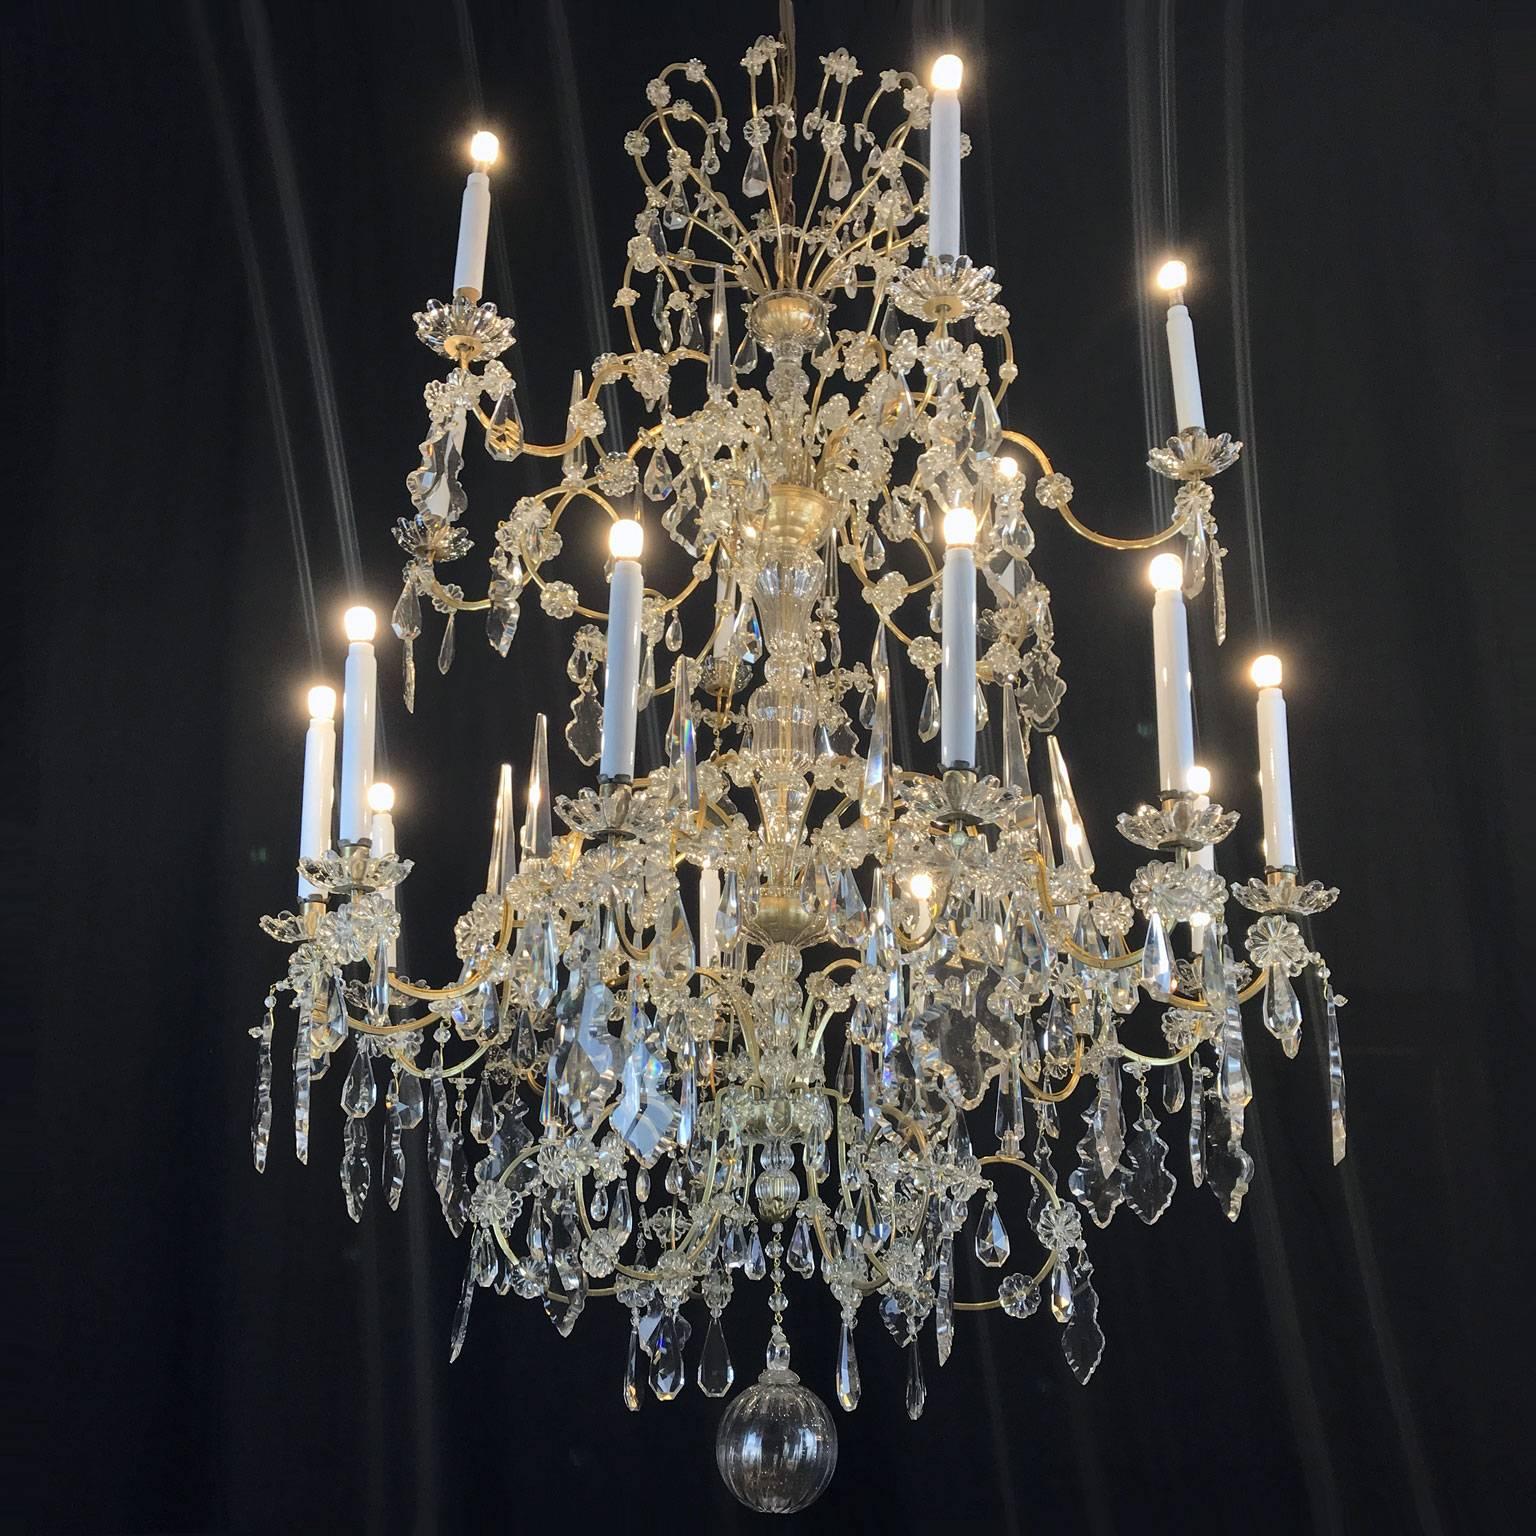 A stunning large Italian crystal chandelier two-tier eighteen-light bronze and crystal chandelier in great condition, coming from the hall of an antique luxury villa at Lake Como, in Northern Italy and dating back to the first decades of 19th